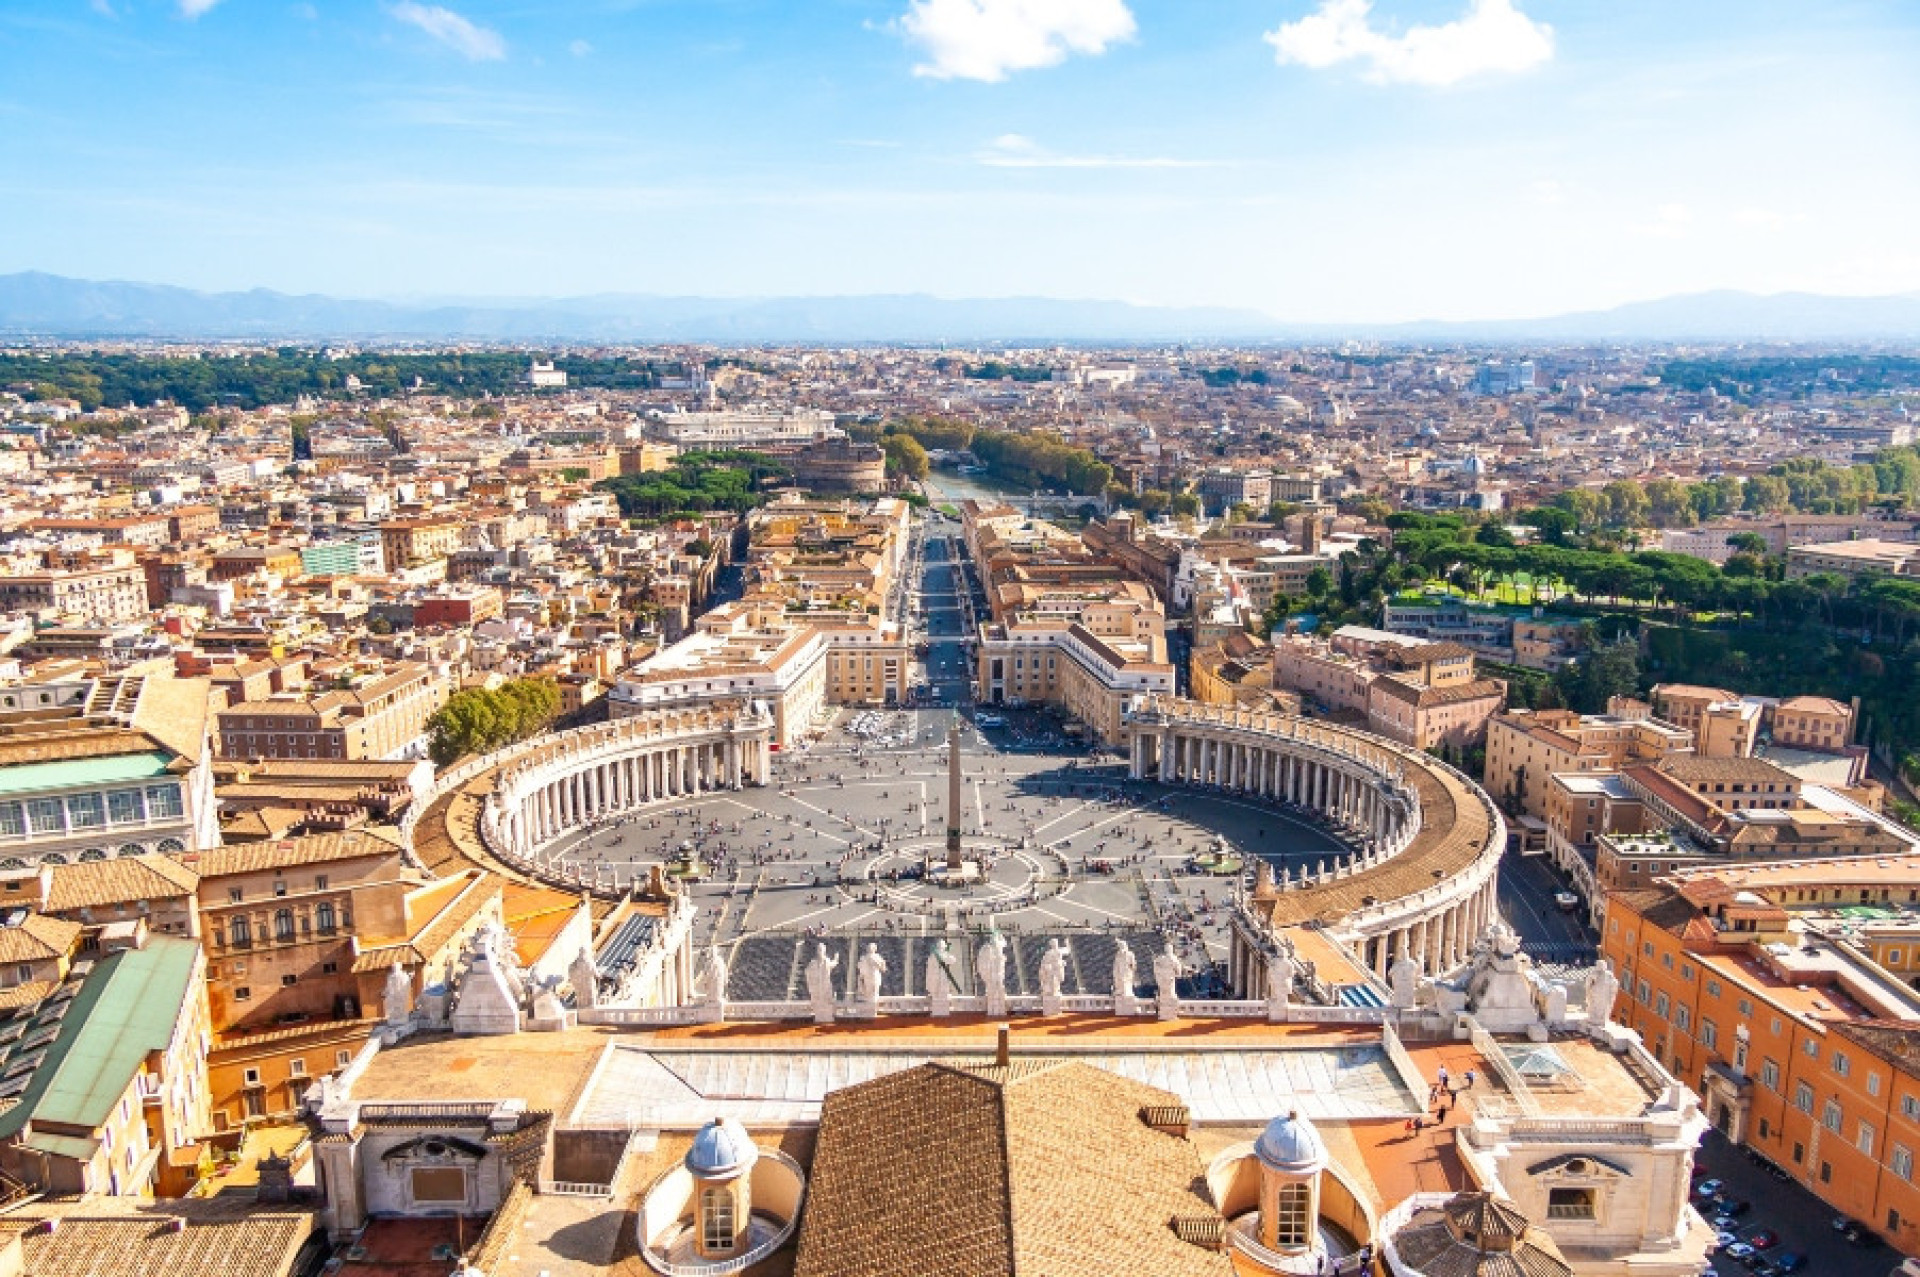 <p>With focused care and a close-knit community, the residents of Vatican City have been noted for living notably longer, vibrant lives. The unique environment of Vatican City, along with lifestyle factors, has contributed to this remarkable standing in life expectancy ratings worldwide.</p><p><a href="https://www.msn.com/en-us/community/channel/vid-7xx8mnucu55yw63we9va2gwr7uihbxwc68fxqp25x6tg4ftibpra?cvid=94631541bc0f4f89bfd59158d696ad7e">Follow us and access great exclusive content every day</a></p>